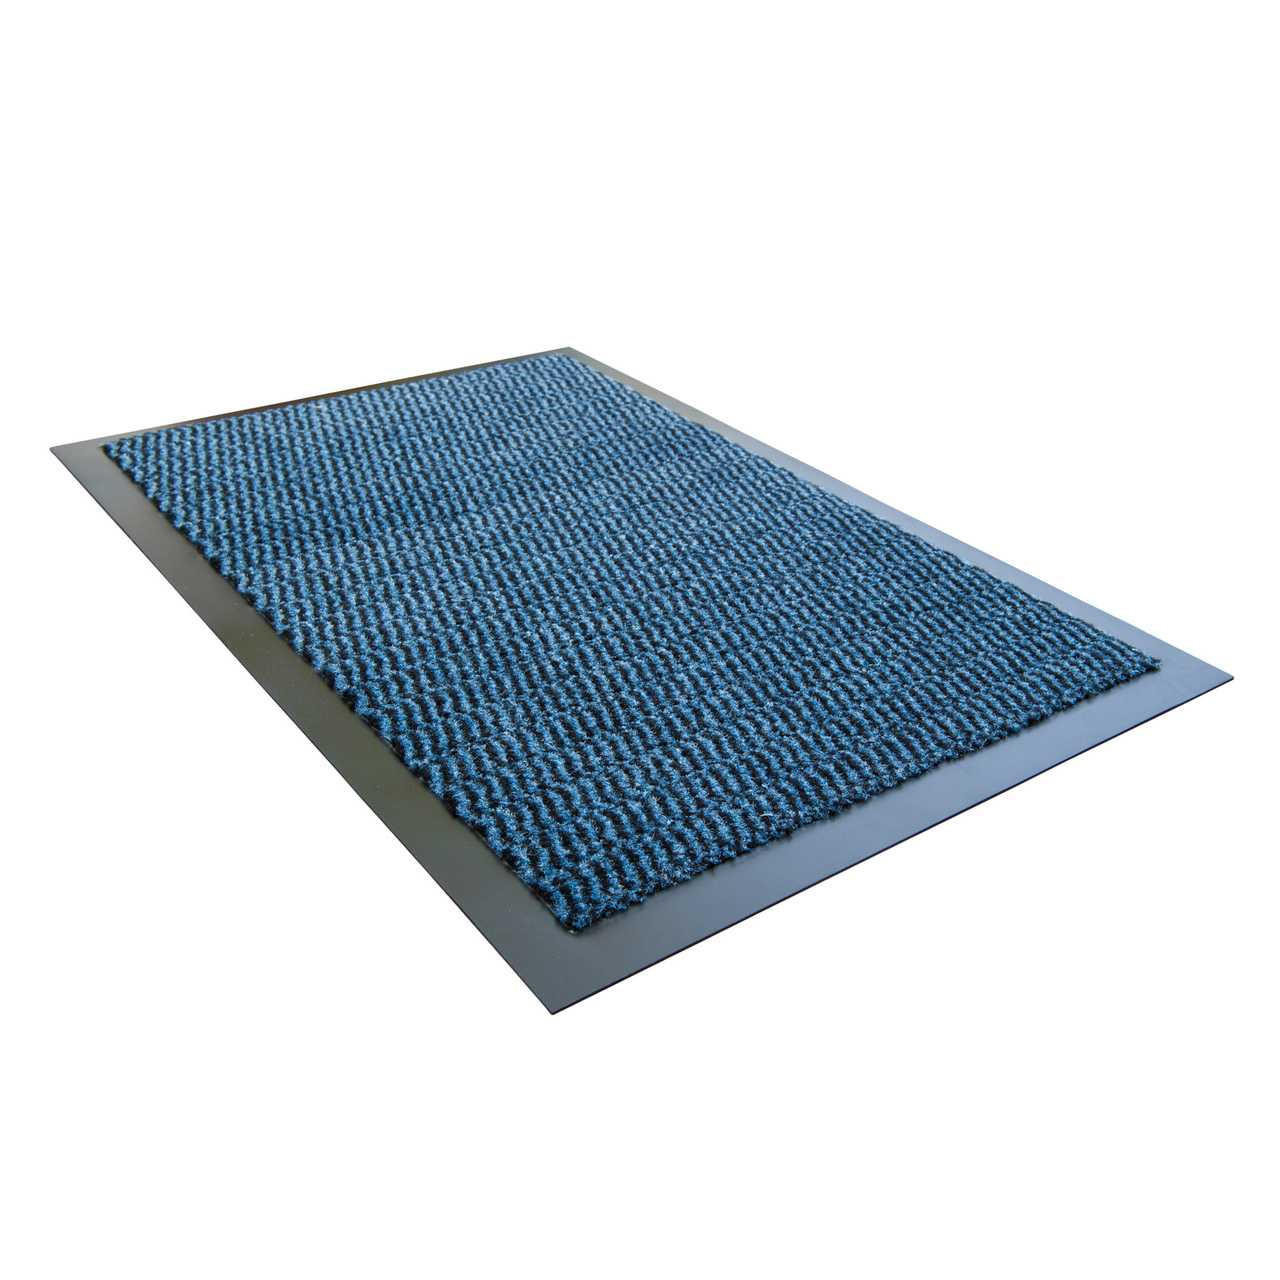 https://cdn11.bigcommerce.com/s-fjwps1jbkv/images/stencil/1280x1280/products/143/3889/ultralux-indoor-entrance-mat-or-polypropylene-fibers-and-anti-slip-vinyl-backed-entry-rug-doormat-or-blue__08489.1689078944.jpg?c=2?imbypass=on